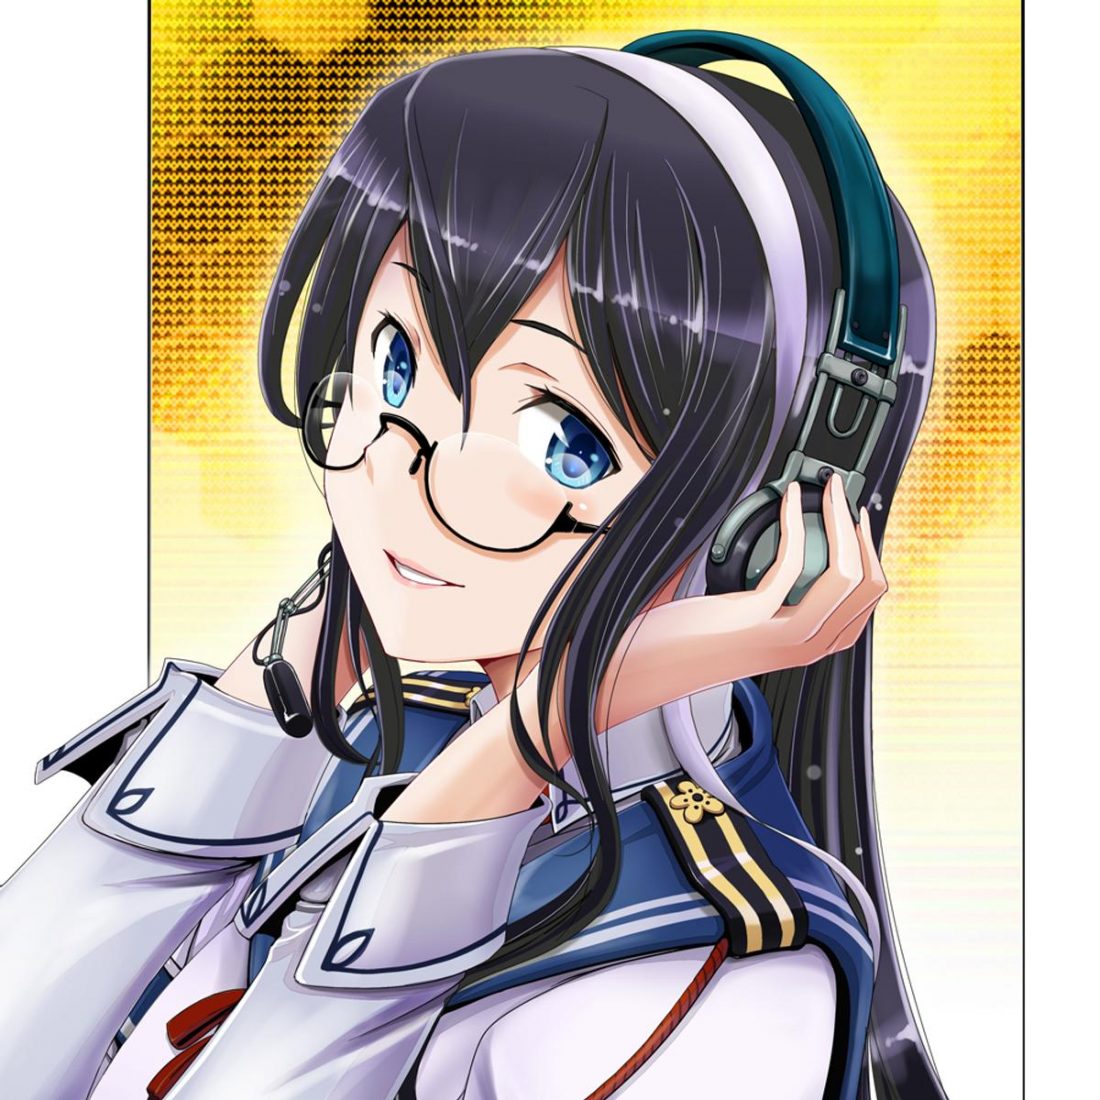 Ooyodo from Kantai Collection: KanColle (from zerochan.net)